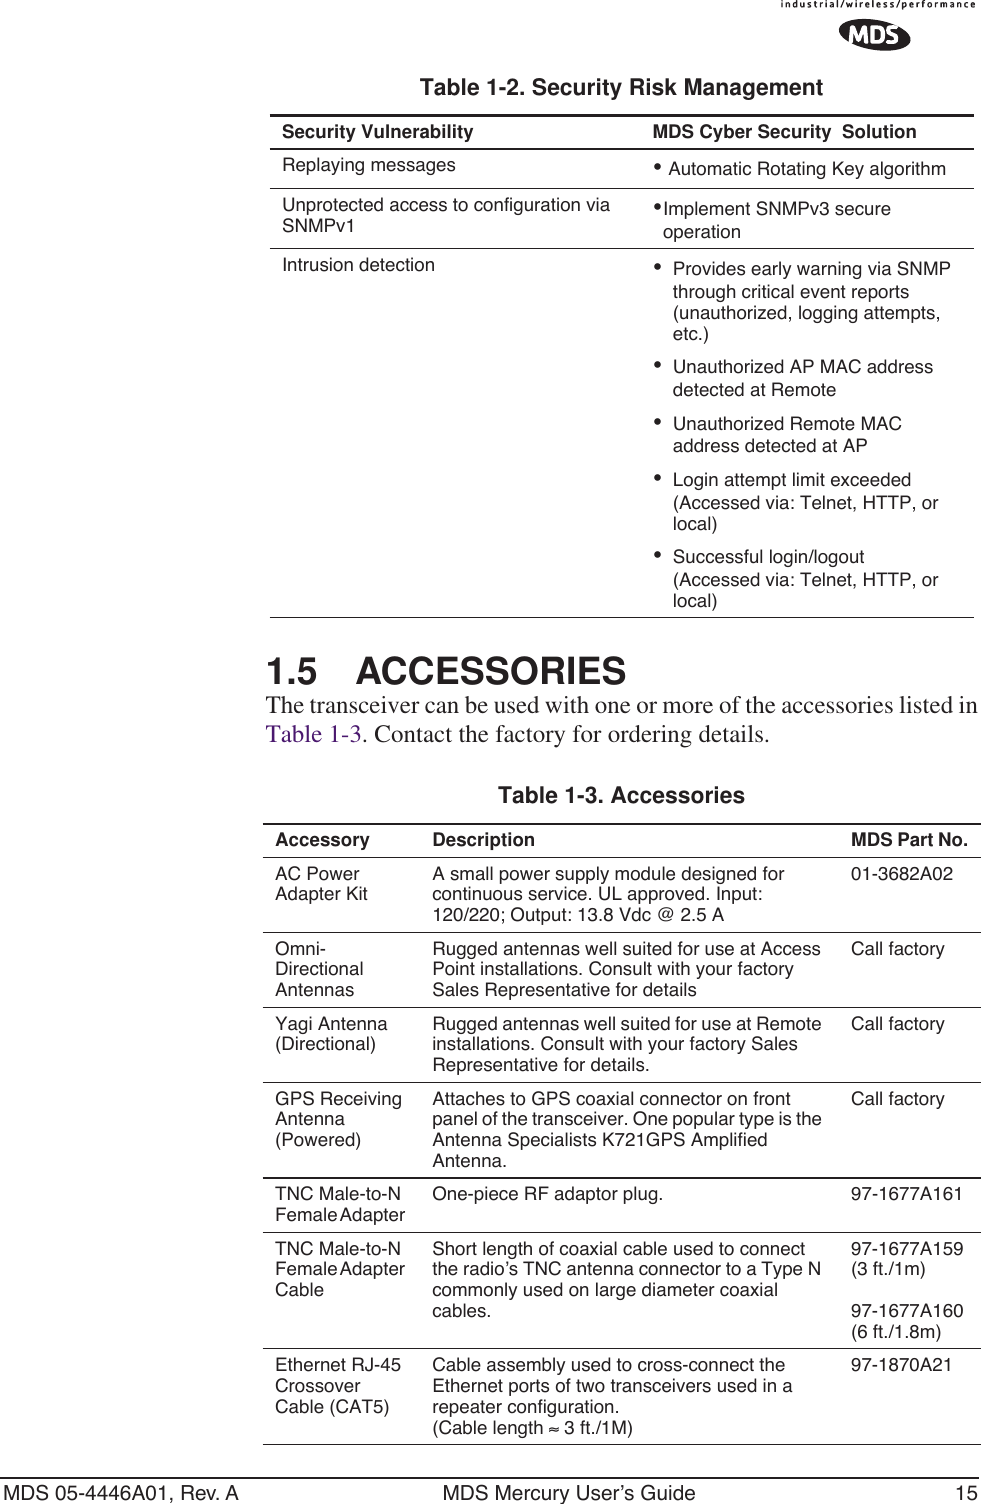 MDS 05-4446A01, Rev. A MDS Mercury User’s Guide 151.5 ACCESSORIESThe transceiver can be used with one or more of the accessories listed inTable 1-3. Contact the factory for ordering details.Replaying messages • Automatic Rotating Key algorithmUnprotected access to configuration via SNMPv1 •Implement SNMPv3 secure operationIntrusion detection •Provides early warning via SNMP through critical event reports (unauthorized, logging attempts, etc.)•Unauthorized AP MAC address detected at Remote•Unauthorized Remote MAC address detected at AP•Login attempt limit exceeded (Accessed via: Telnet, HTTP, or local)•Successful login/logout (Accessed via: Telnet, HTTP, or local)Table 1-2. Security Risk ManagementSecurity Vulnerability MDS Cyber Security  SolutionTable 1-3. Accessories  Accessory Description MDS Part No.AC Power Adapter KitA small power supply module designed for continuous service. UL approved. Input: 120/220; Output: 13.8 Vdc @ 2.5 A01-3682A02Omni- Directional AntennasRugged antennas well suited for use at Access Point installations. Consult with your factory Sales Representative for detailsCall factoryYagi Antenna(Directional)Rugged antennas well suited for use at Remote installations. Consult with your factory Sales Representative for details.Call factoryGPS Receiving Antenna (Powered)Attaches to GPS coaxial connector on front panel of the transceiver. One popular type is the Antenna Specialists K721GPS Amplified Antenna.Call factoryTNC Male-to-N Female Adapter One-piece RF adaptor plug. 97-1677A161TNC Male-to-N Female Adapter CableShort length of coaxial cable used to connect the radio’s TNC antenna connector to a Type N commonly used on large diameter coaxial cables.97-1677A159(3 ft./1m)97-1677A160(6 ft./1.8m)Ethernet RJ-45 Crossover Cable (CAT5)Cable assembly used to cross-connect the Ethernet ports of two transceivers used in a repeater configuration. (Cable length ≈ 3 ft./1M)97-1870A21